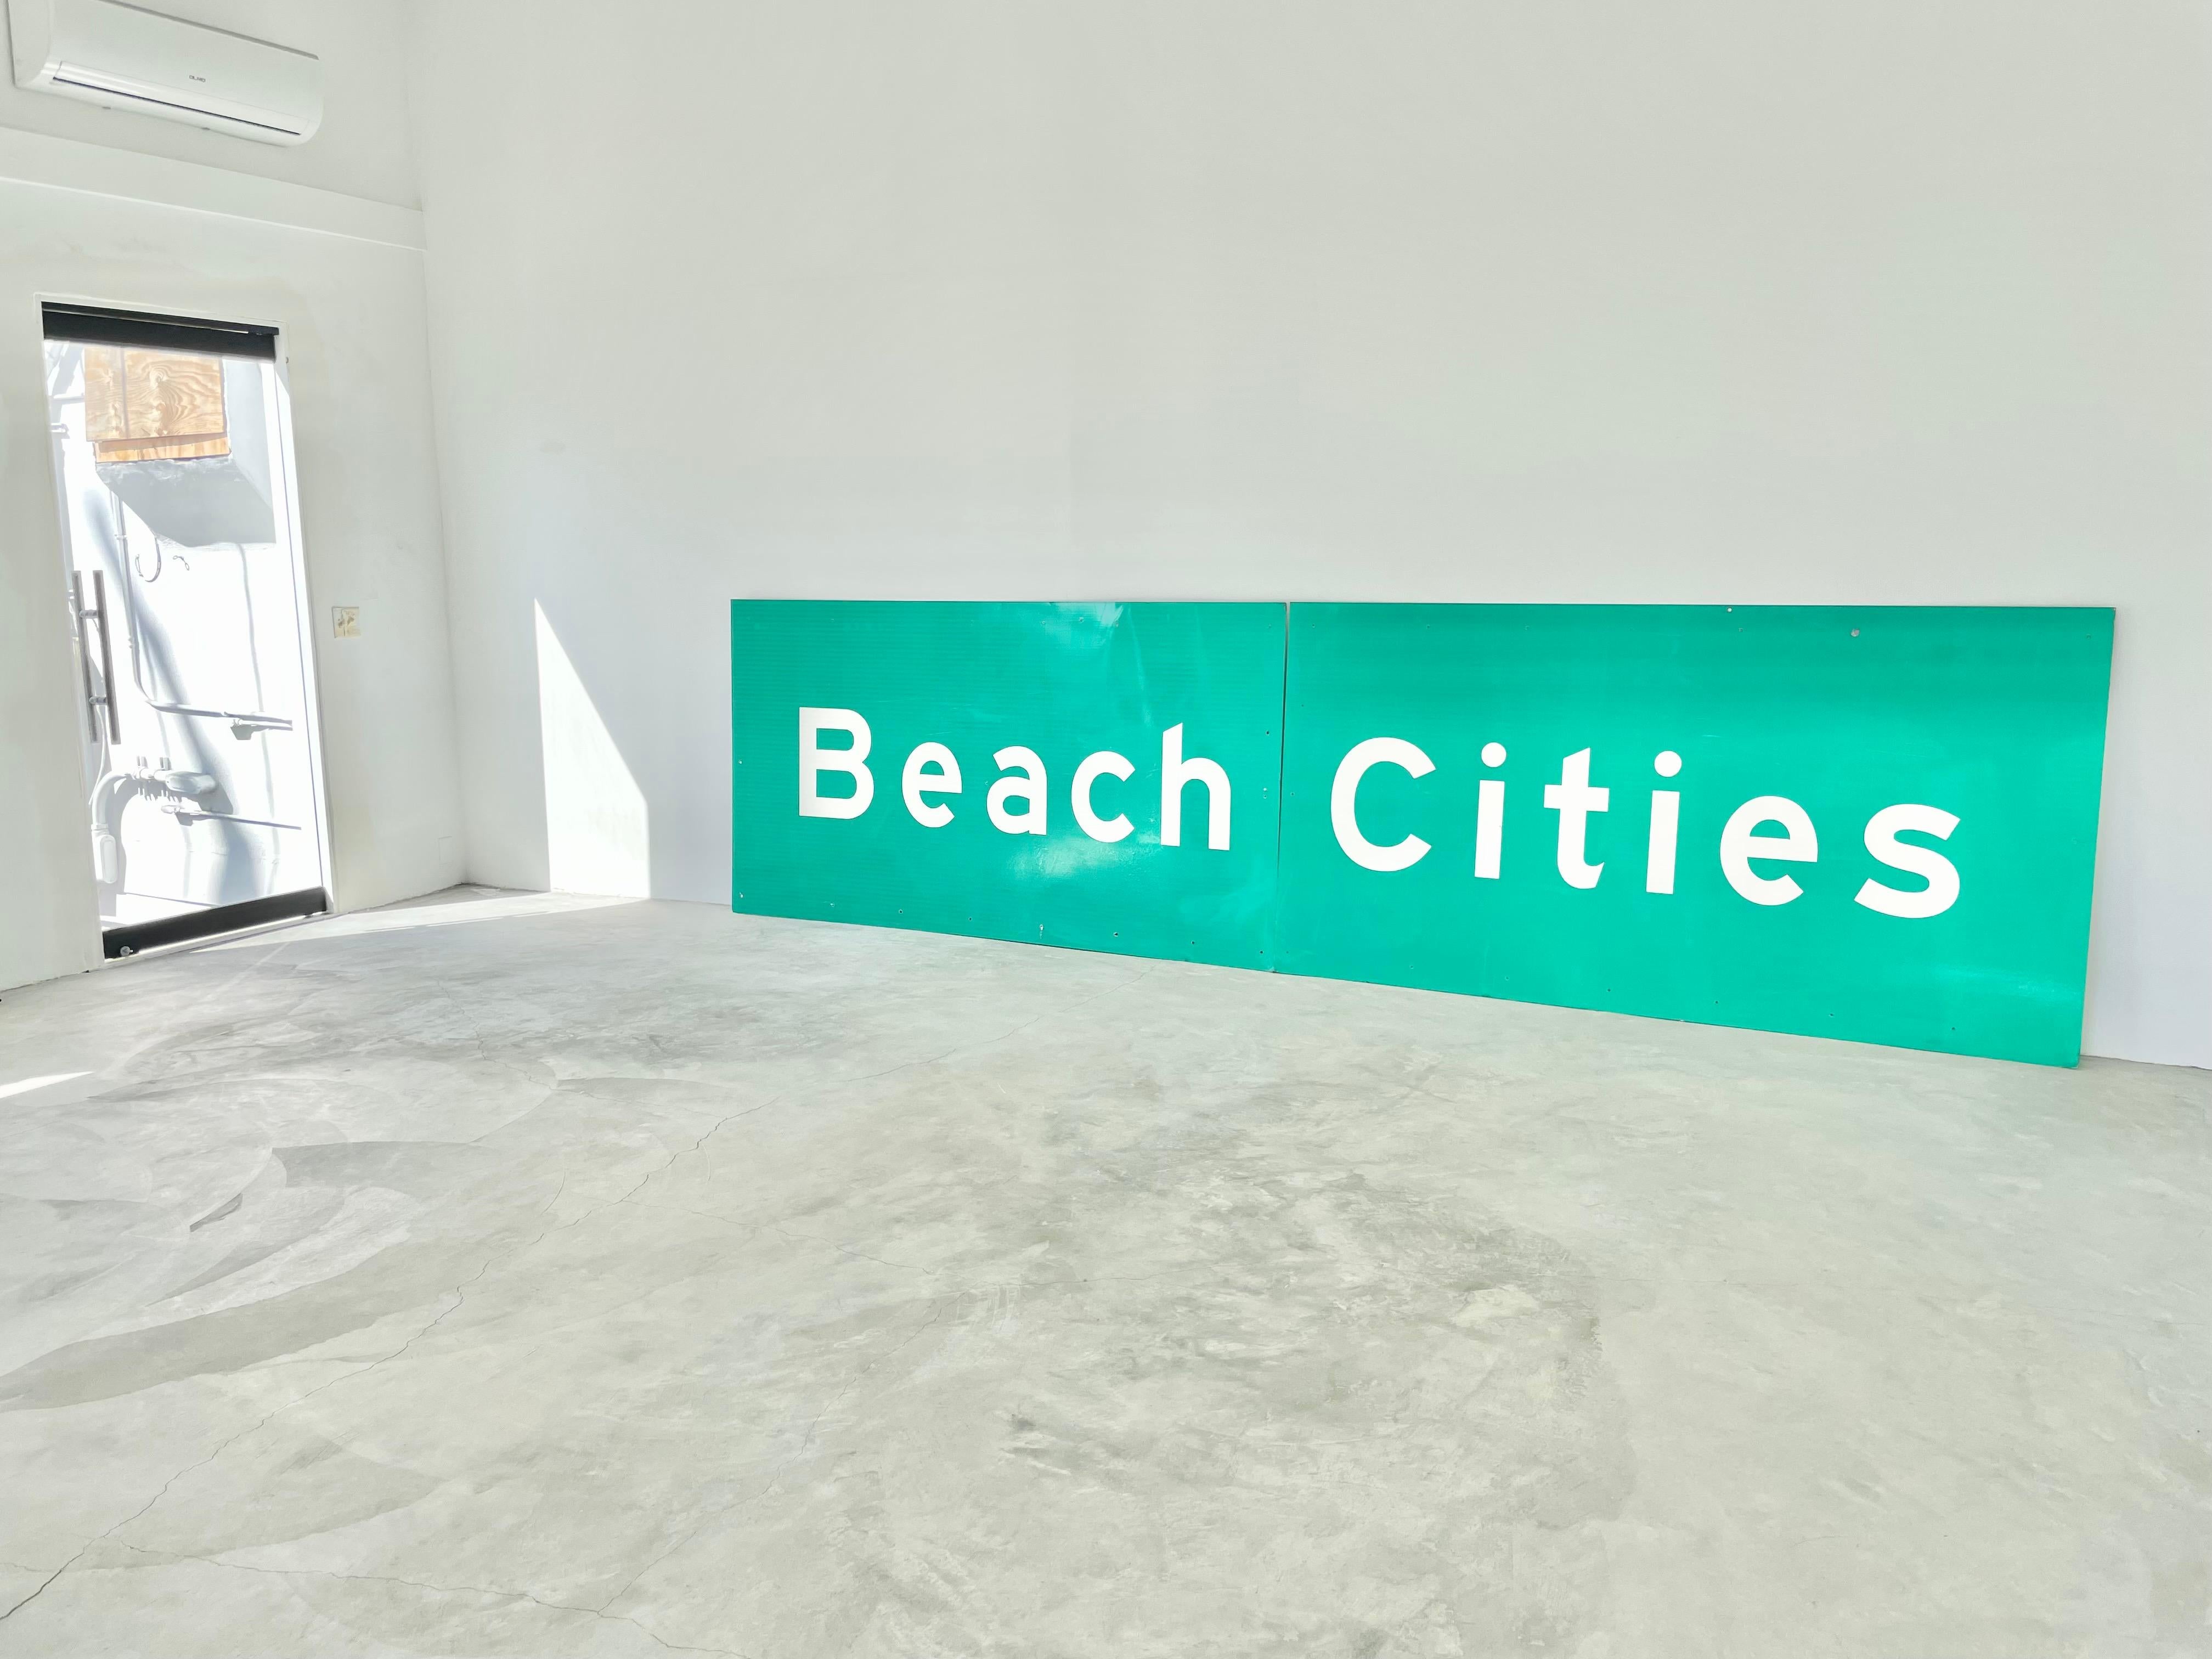 Monumental Los Angeles freeway sign from the 90s. Beach Cities sign showing people which way to Manhattan Beach, Redondo Beach and other cities. Reflective material. In great condition for its age. Would look amazing framed and hung in a beach